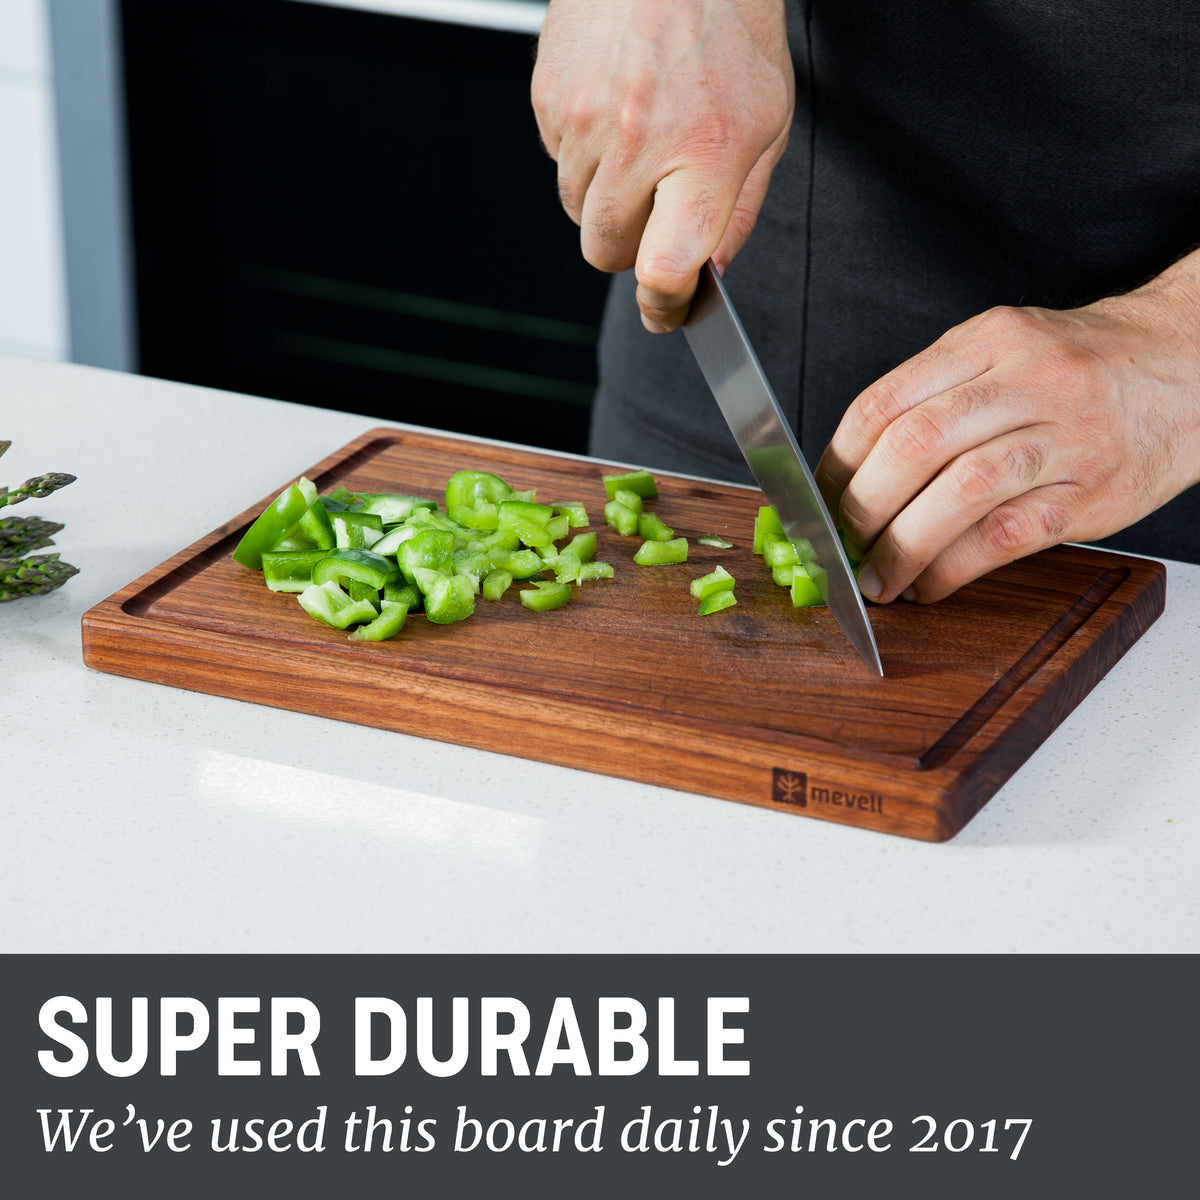 durable walnut cutting board for vegetables